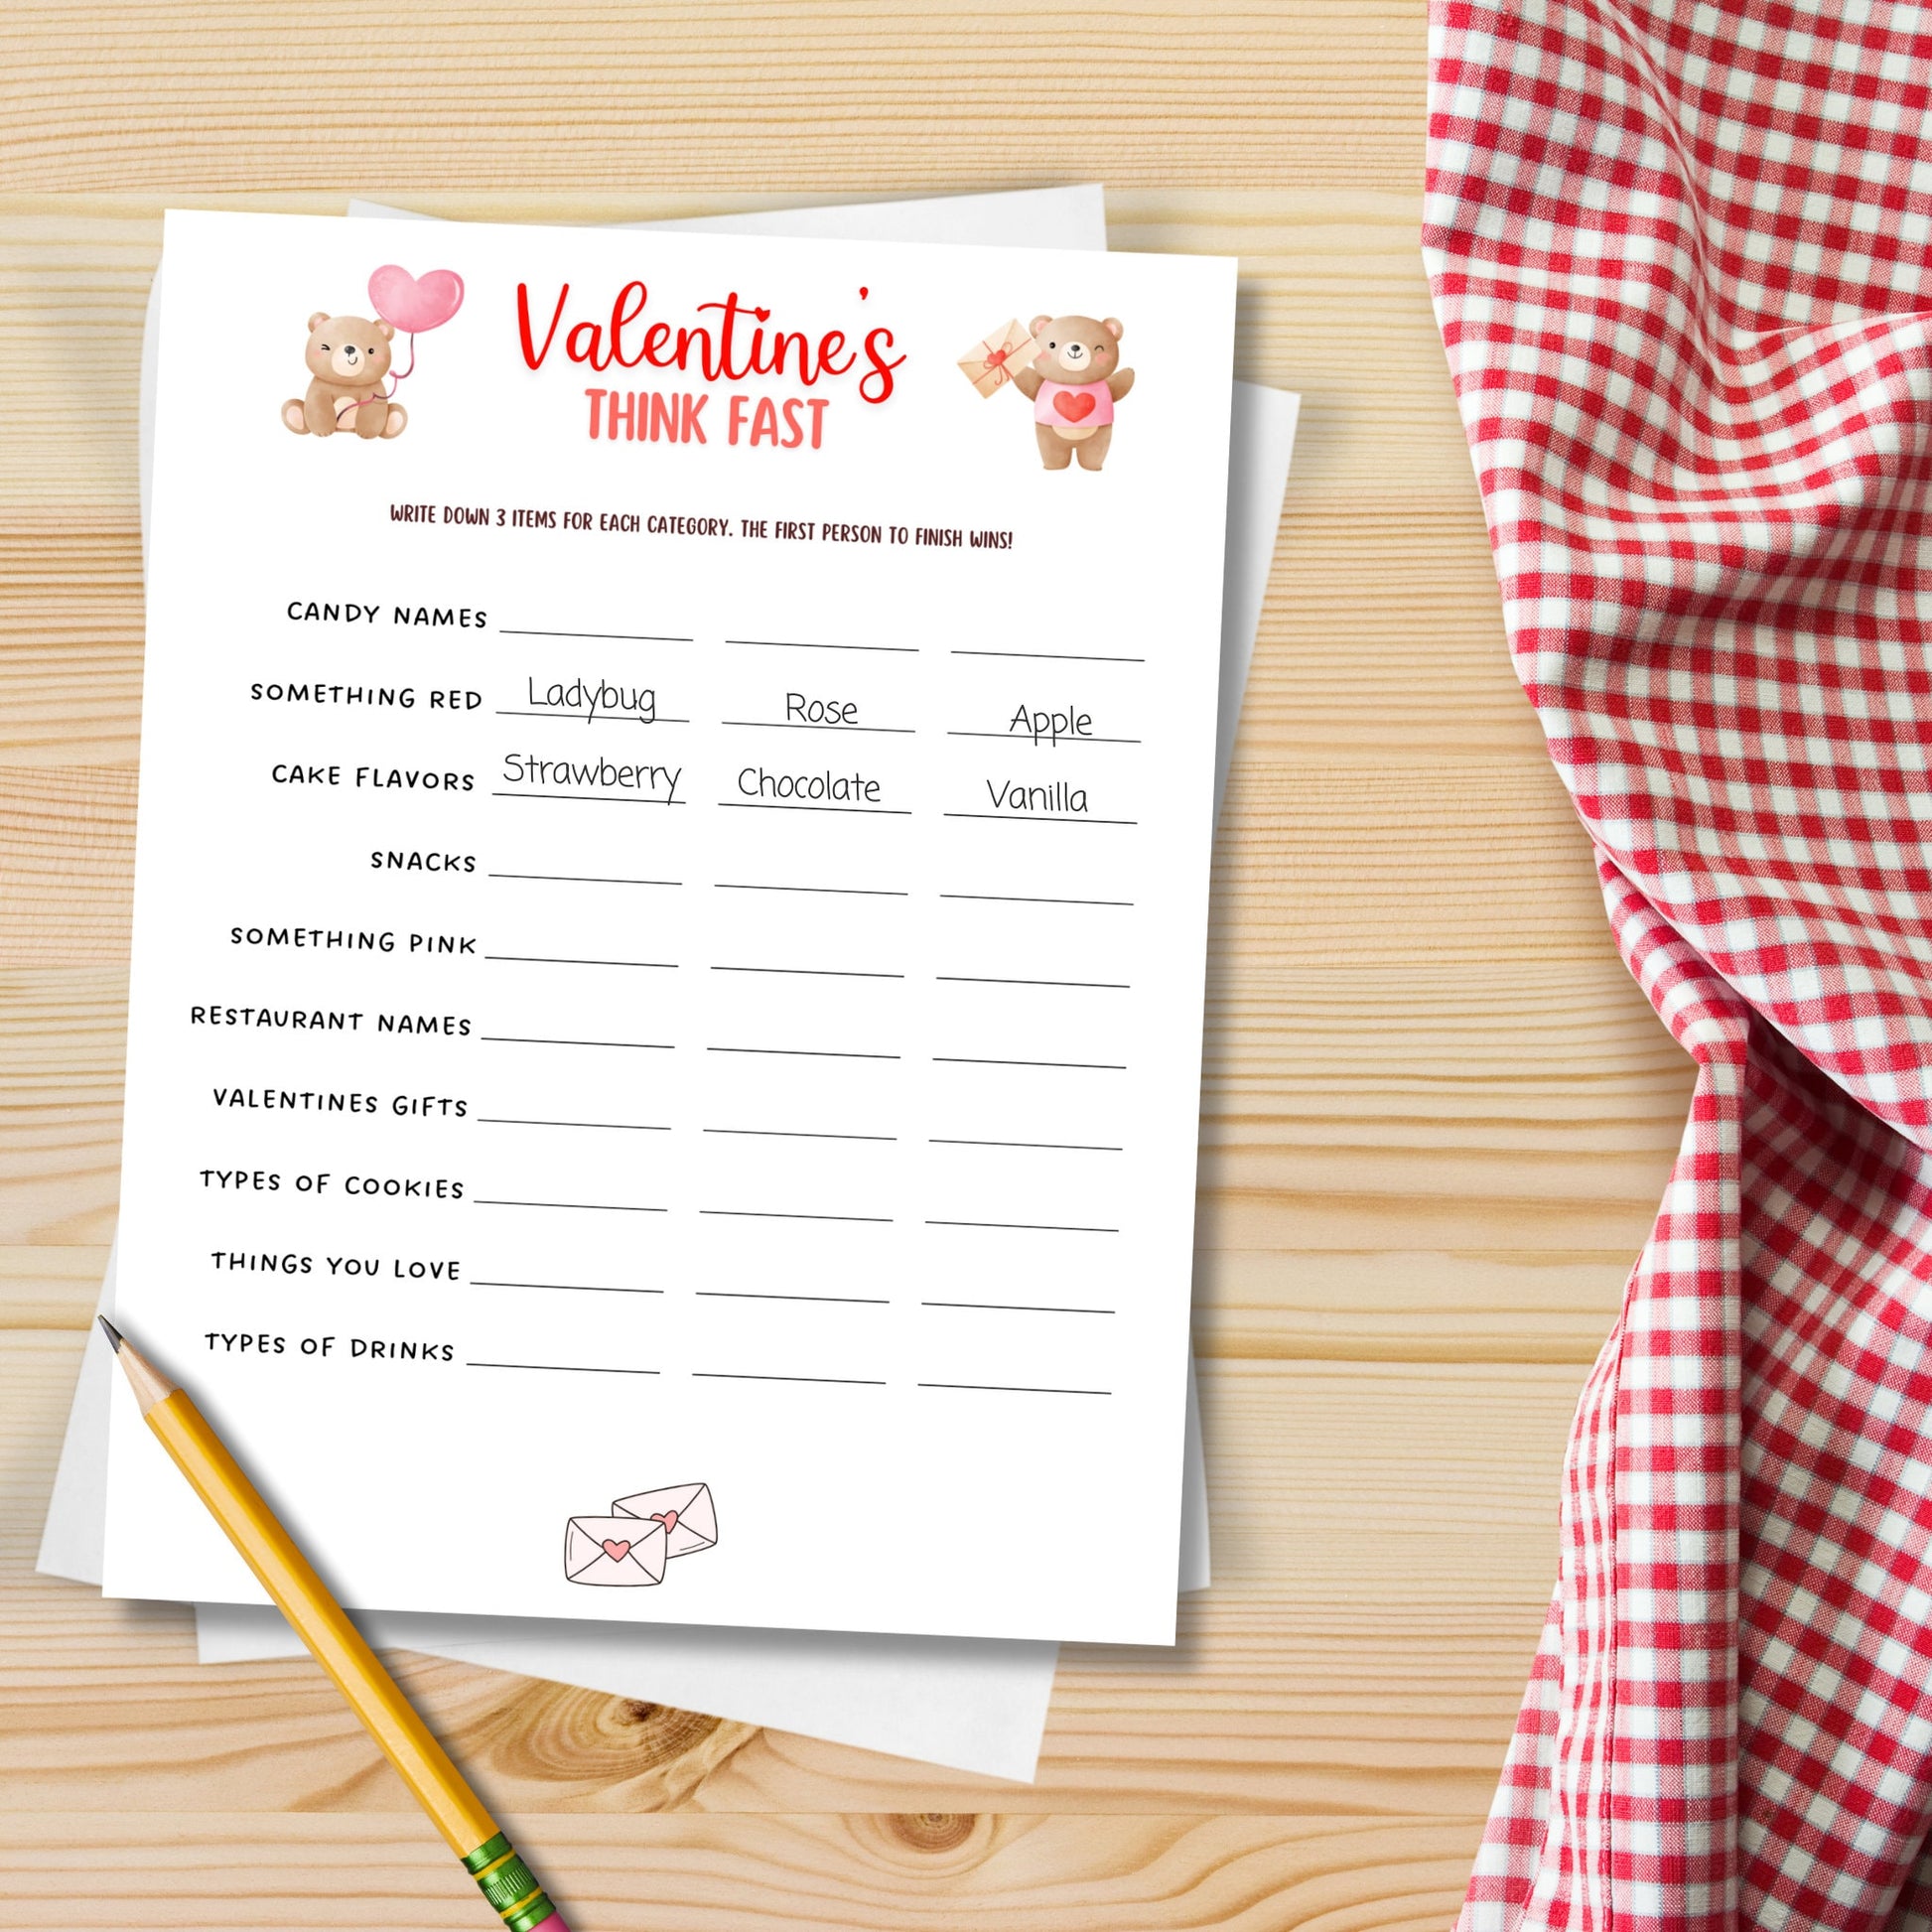 Valentine's Day Game Bundle For Kids Printable, Valentines Kid Games, Fun Family Games, Valentines Party Games, Valentine Classroom Activity